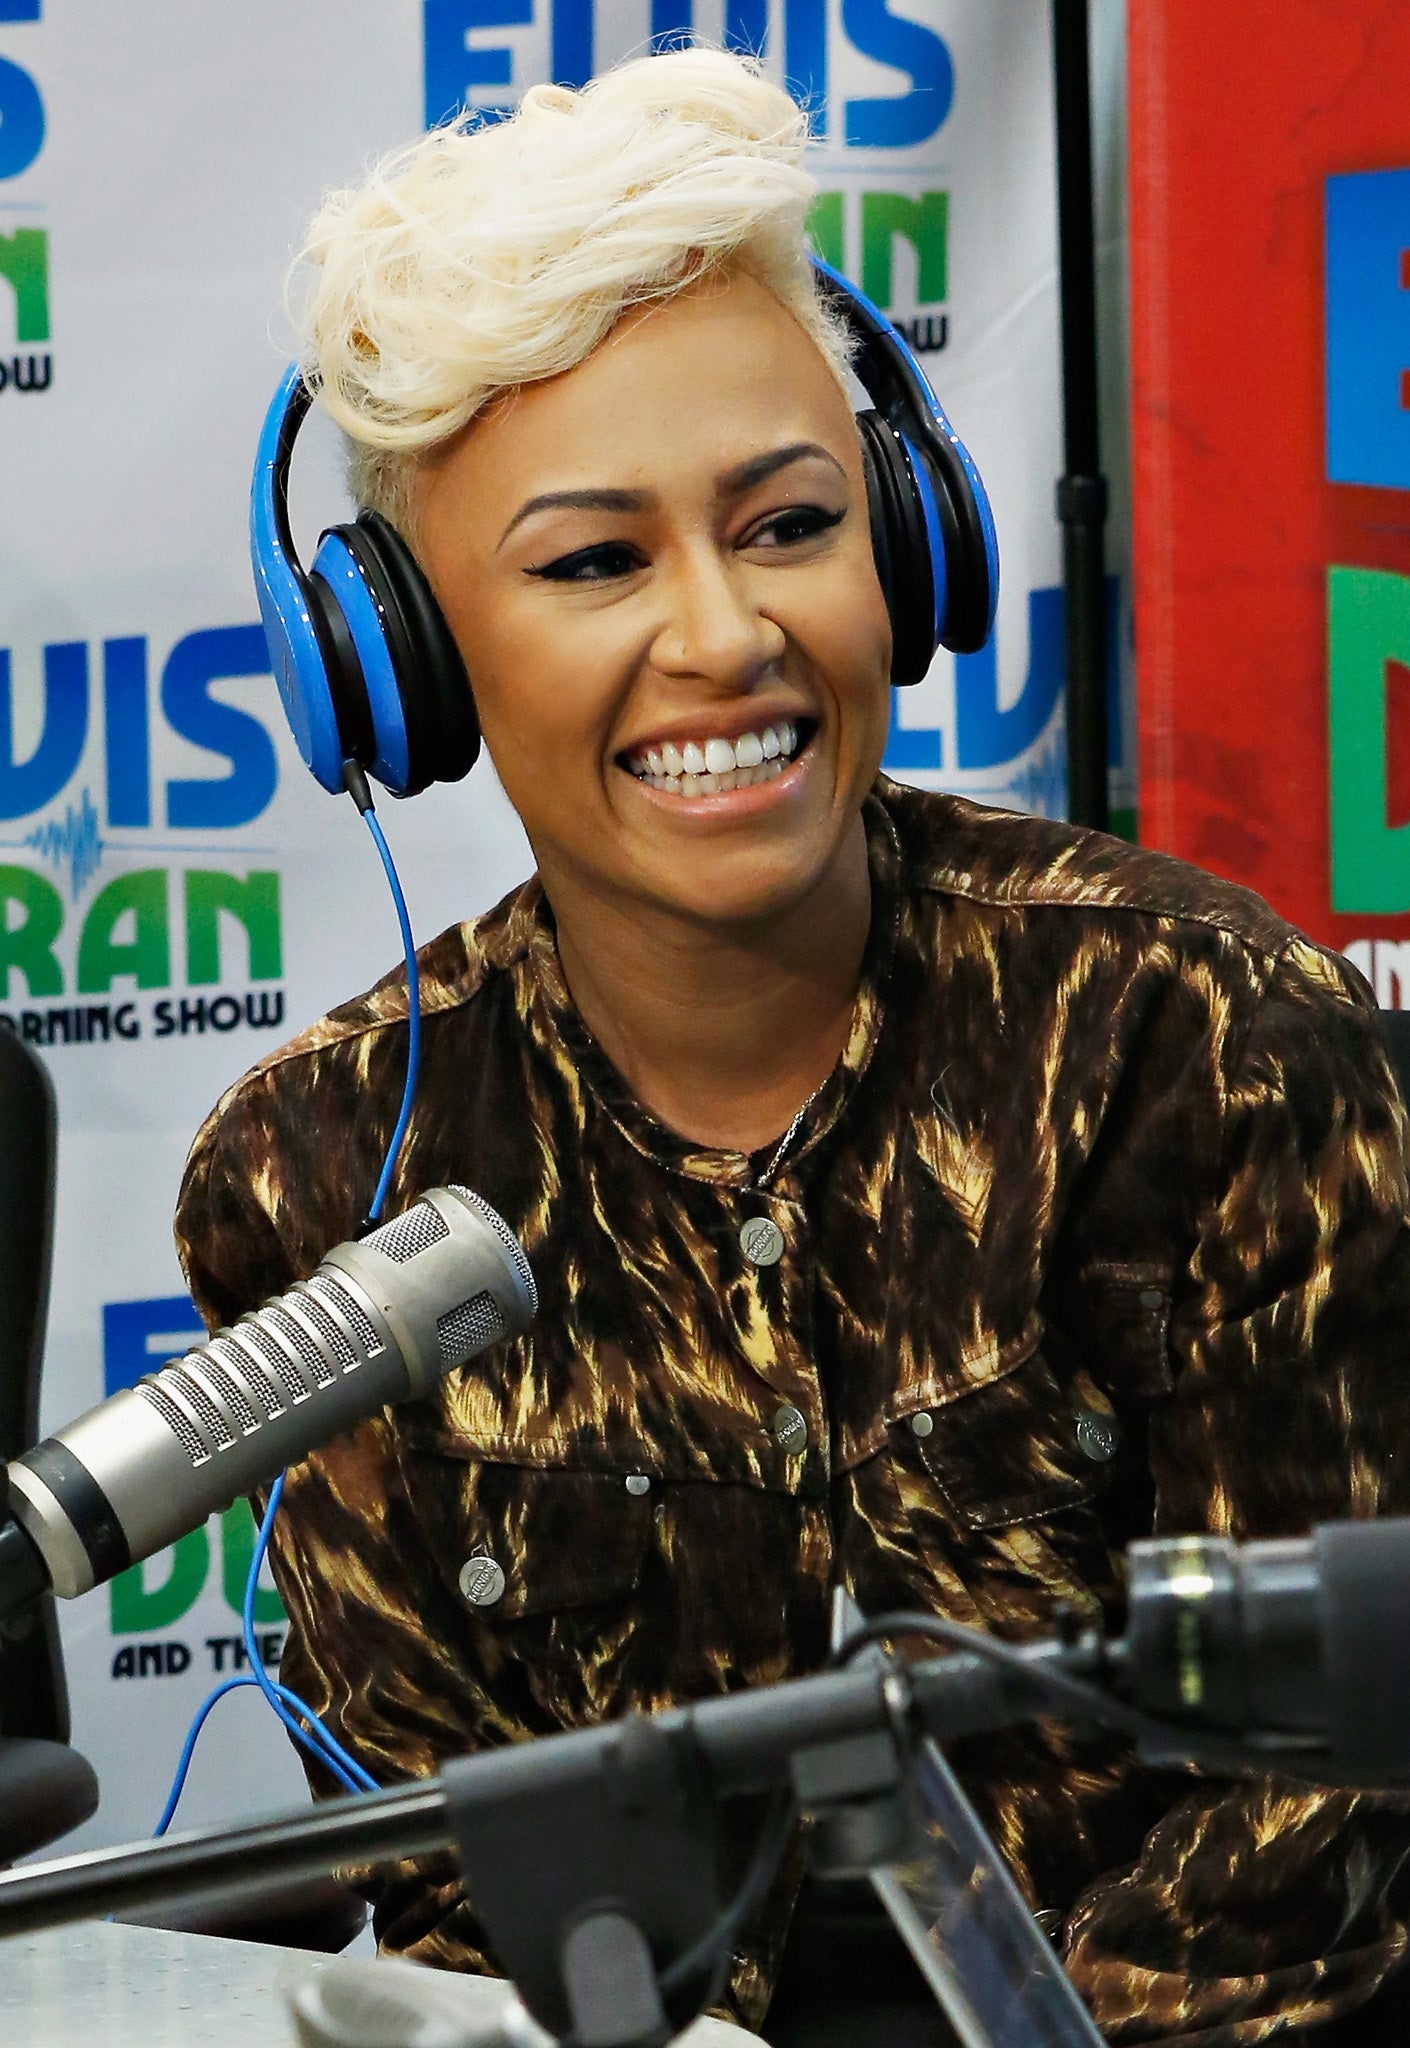 emeli sande read all about it part 3 reply